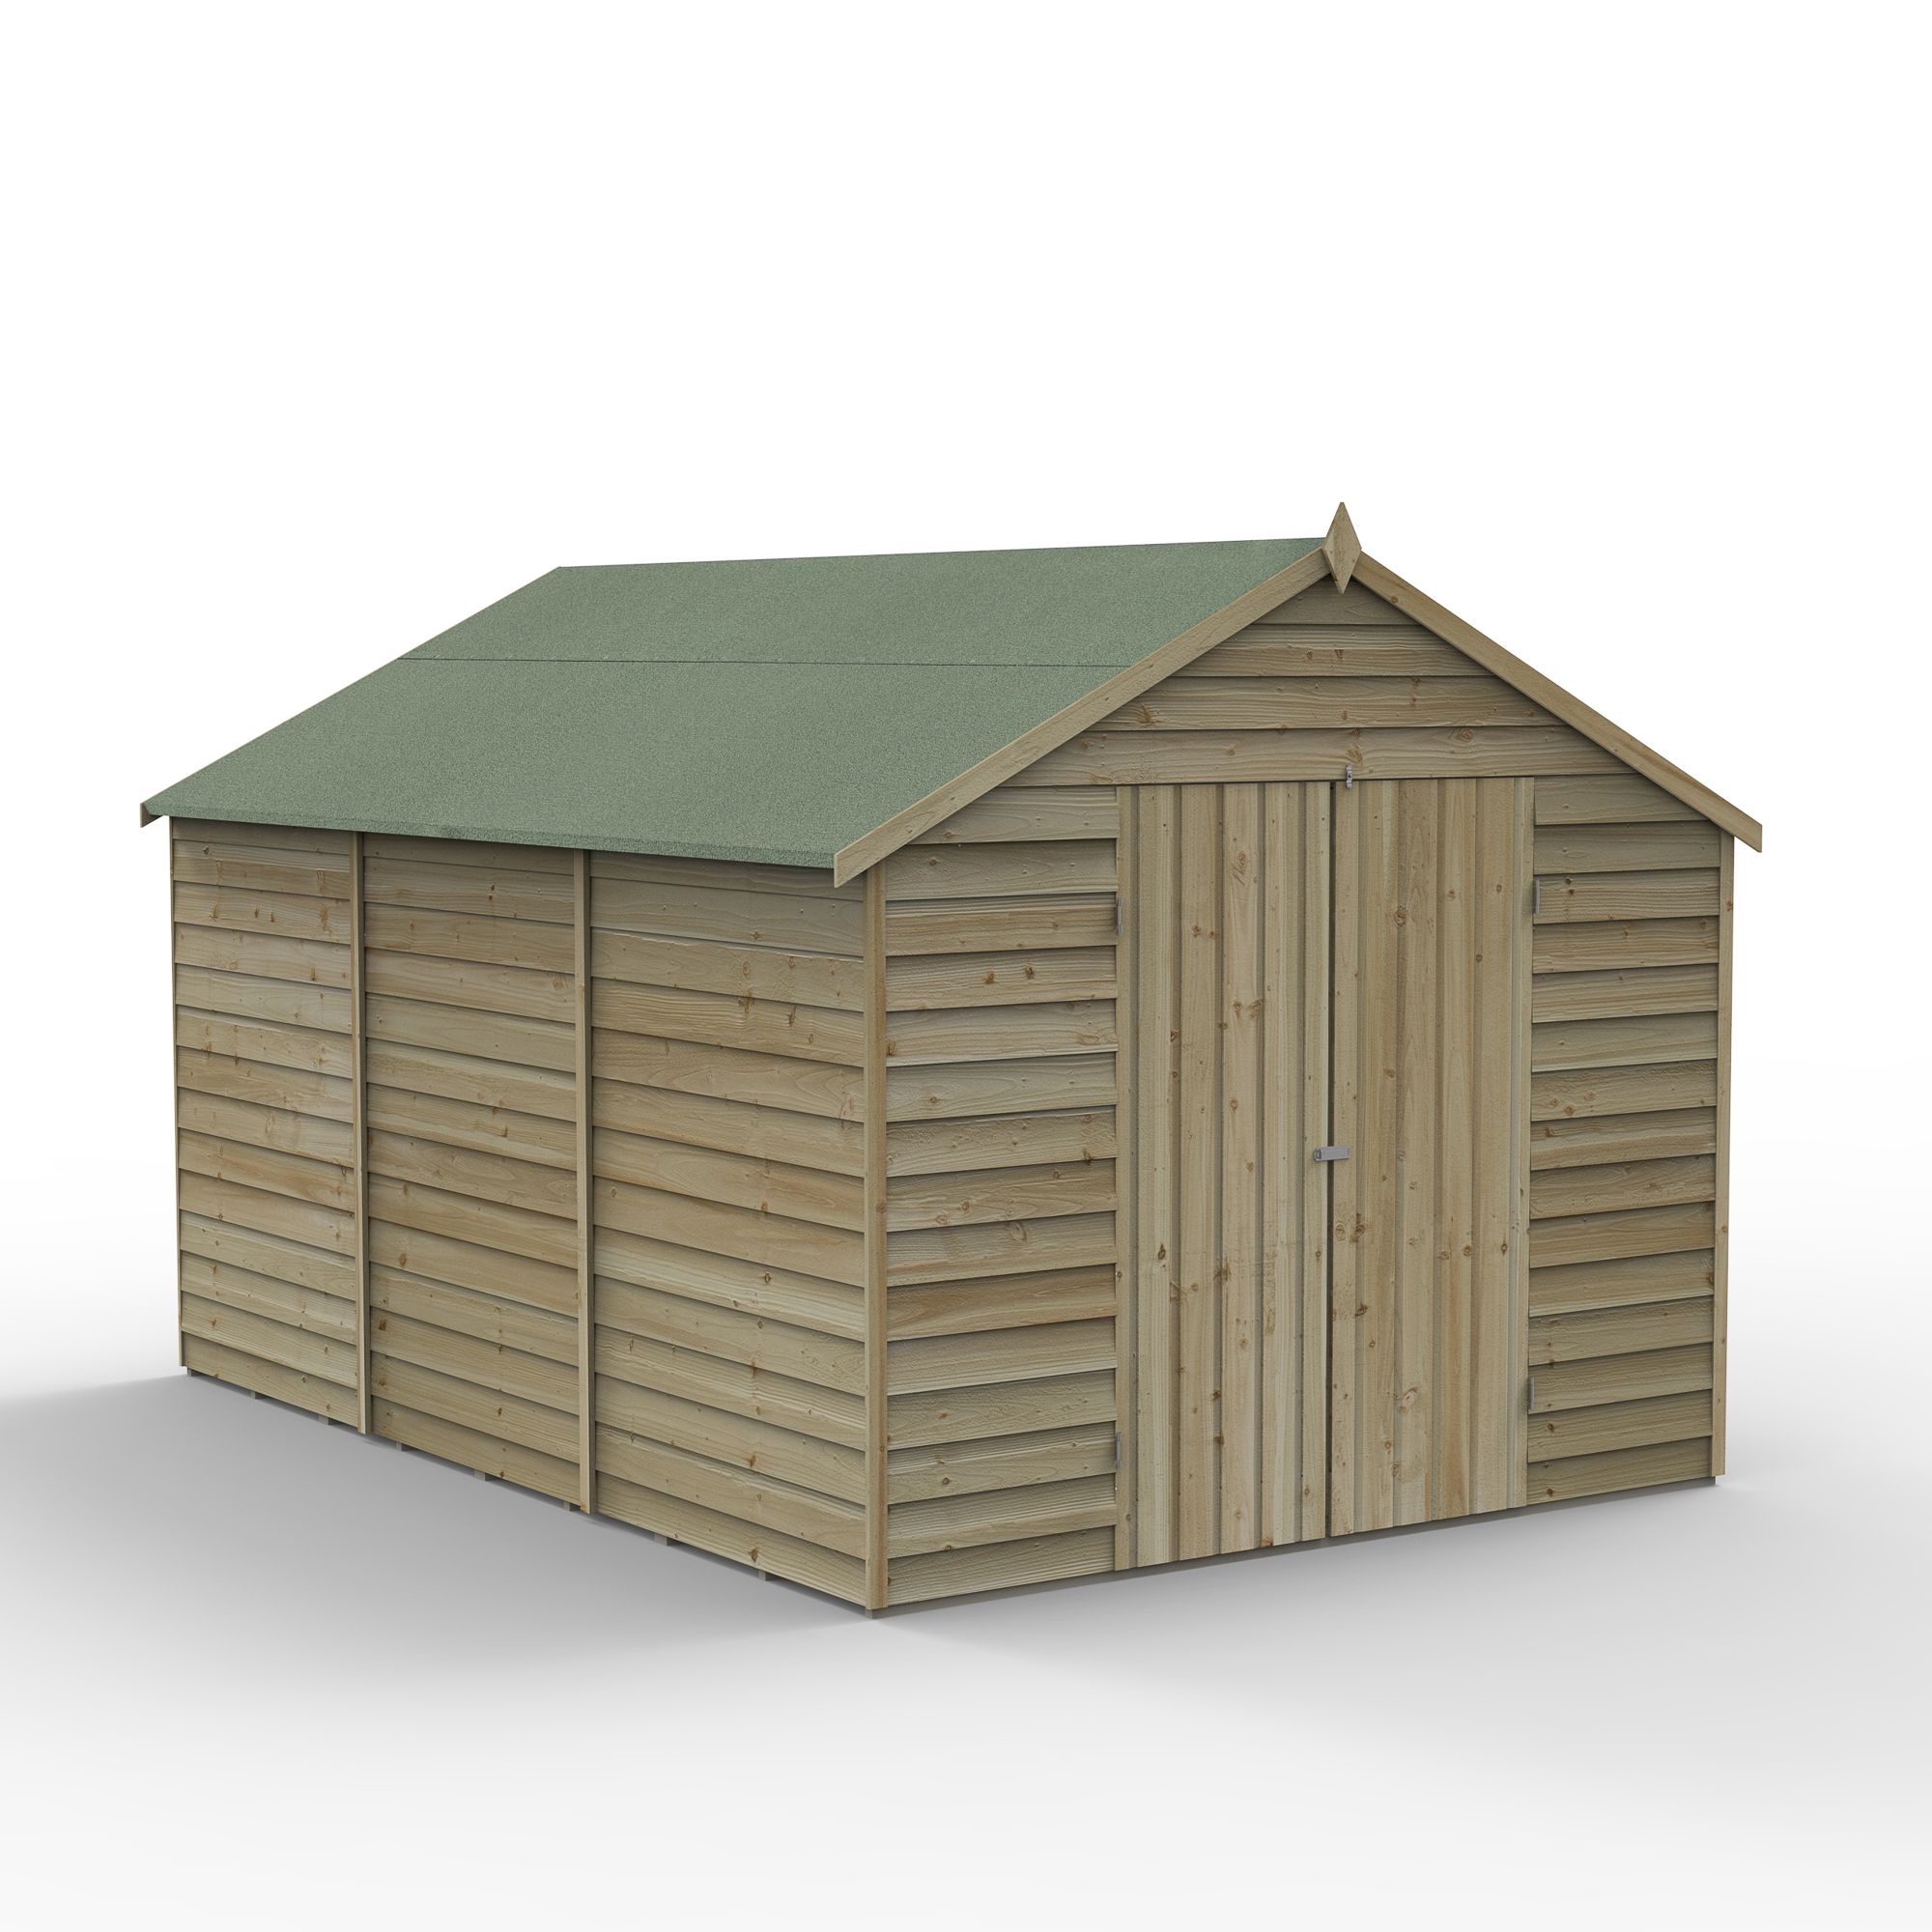 Forest Garden Overlap 12x8 ft Apex Wooden 2 door Shed with floor (Base included) - Assembly service included